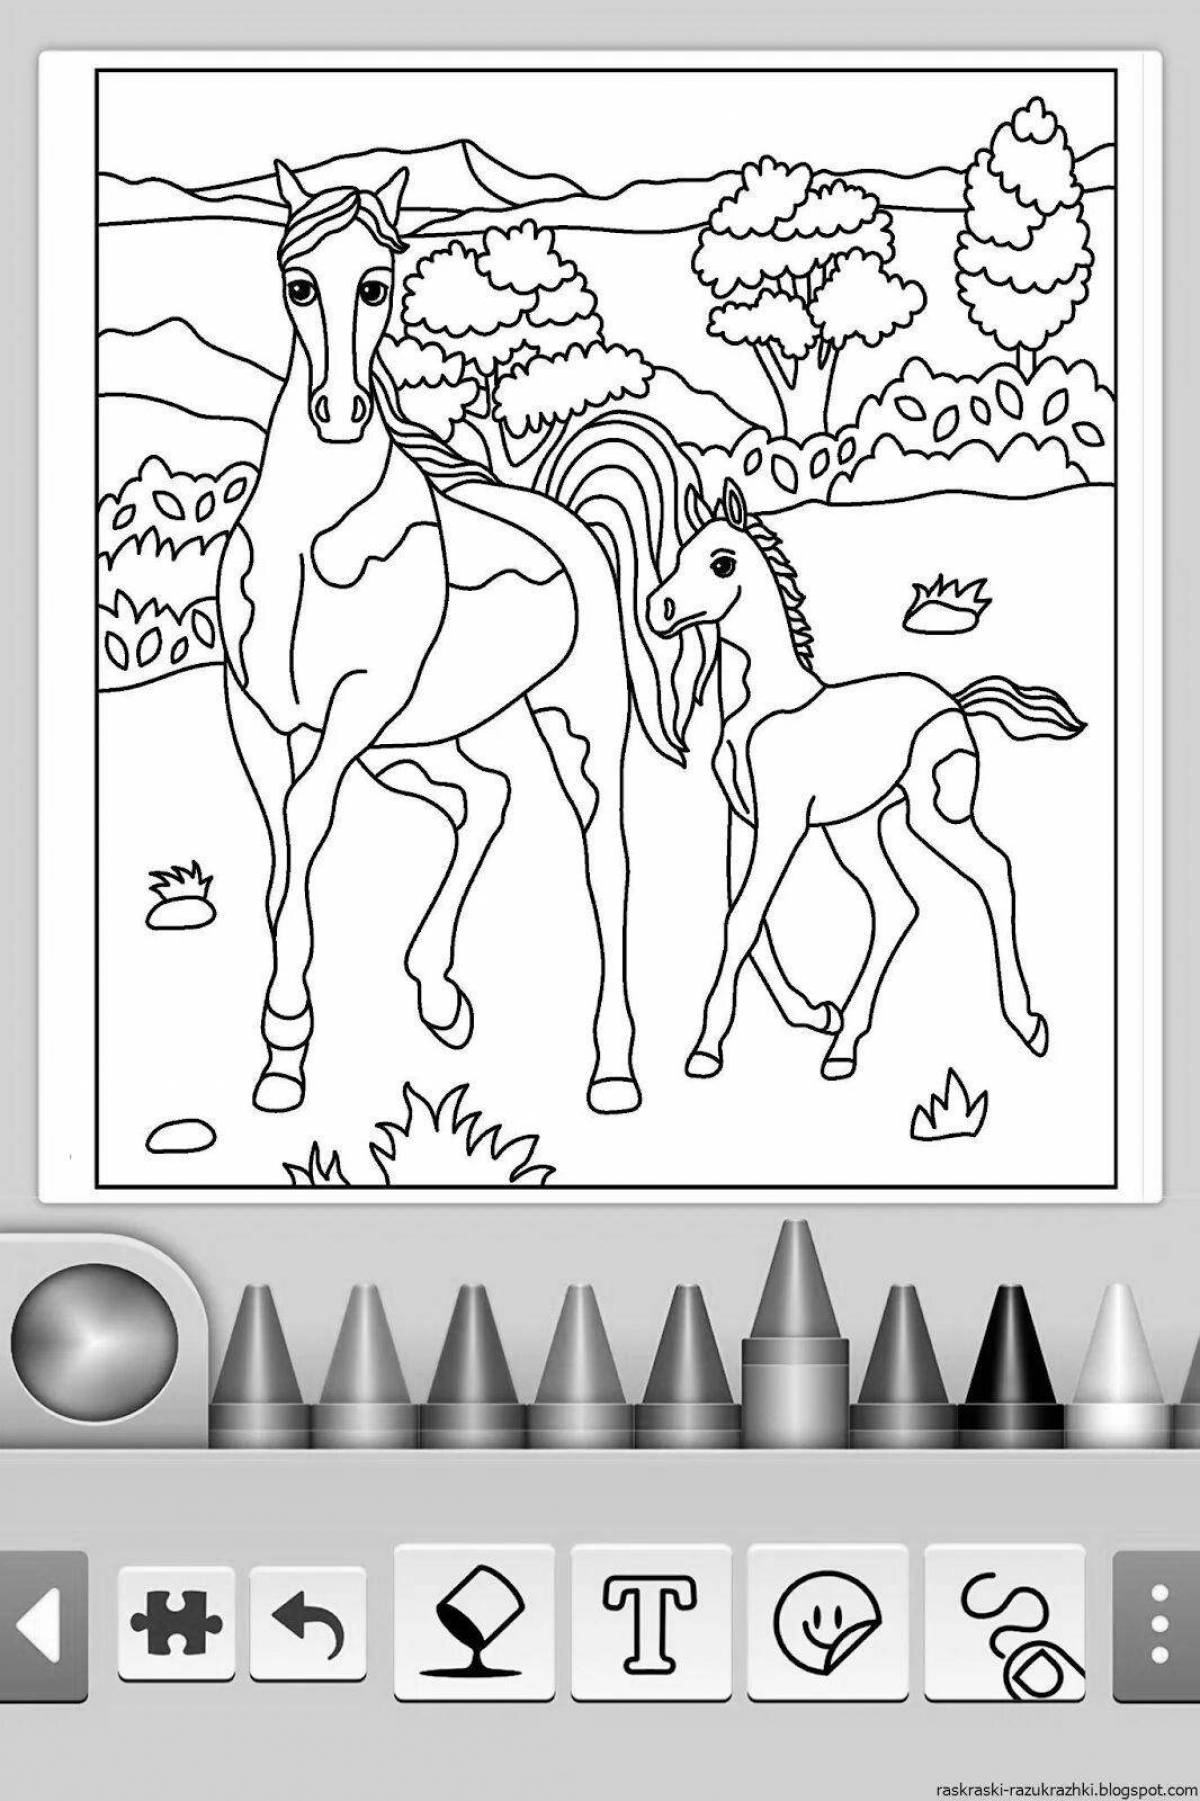 Exquisite coloring game for girls 4-5 years old